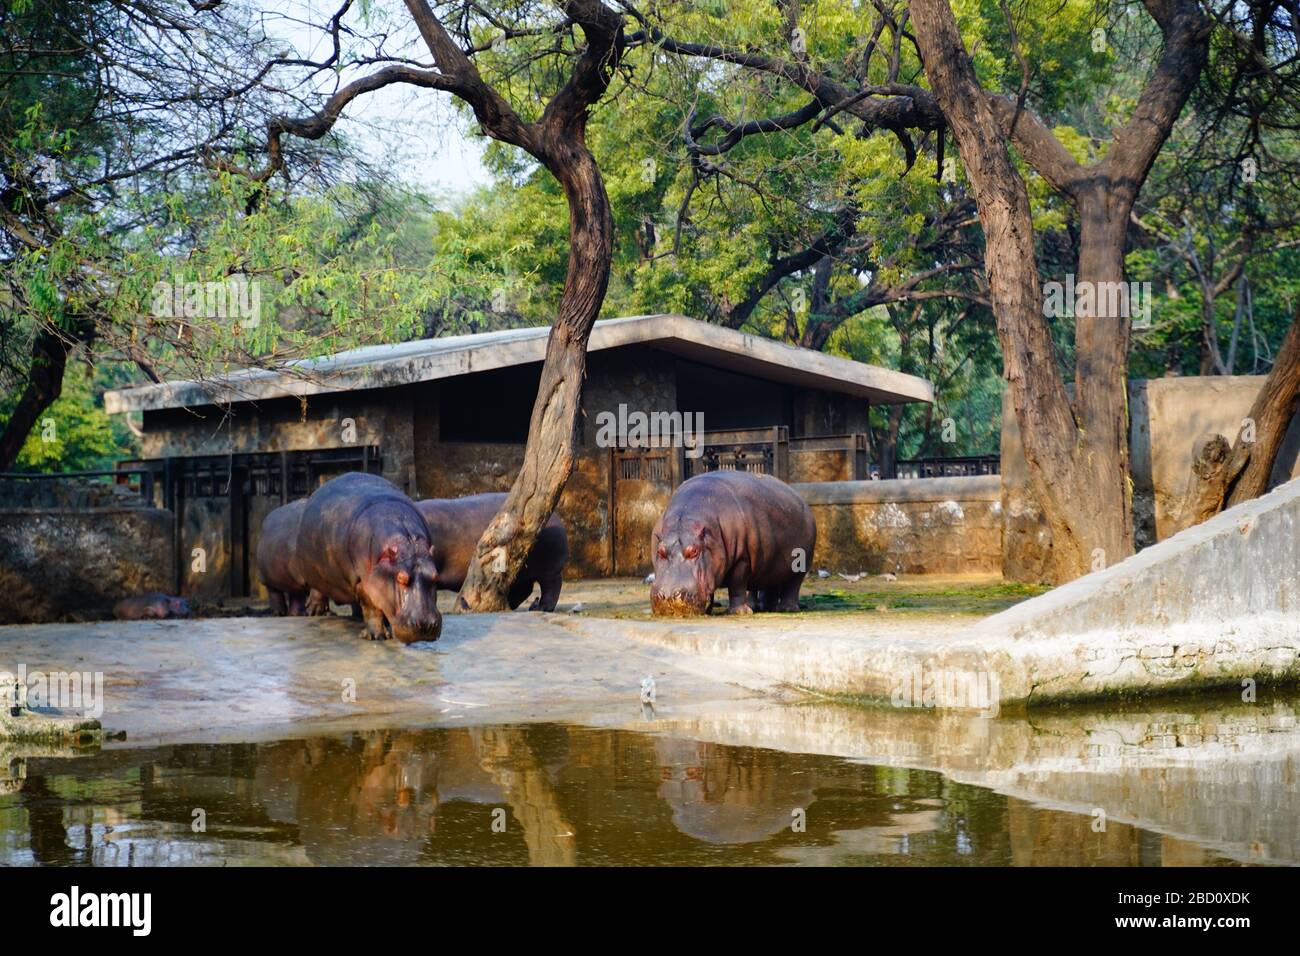 The National Zoological Park is a 176-acre zoo in New Delhi, India. A 16th-century citadel, a sprawling green island and a motley collection of animal Stock Photo